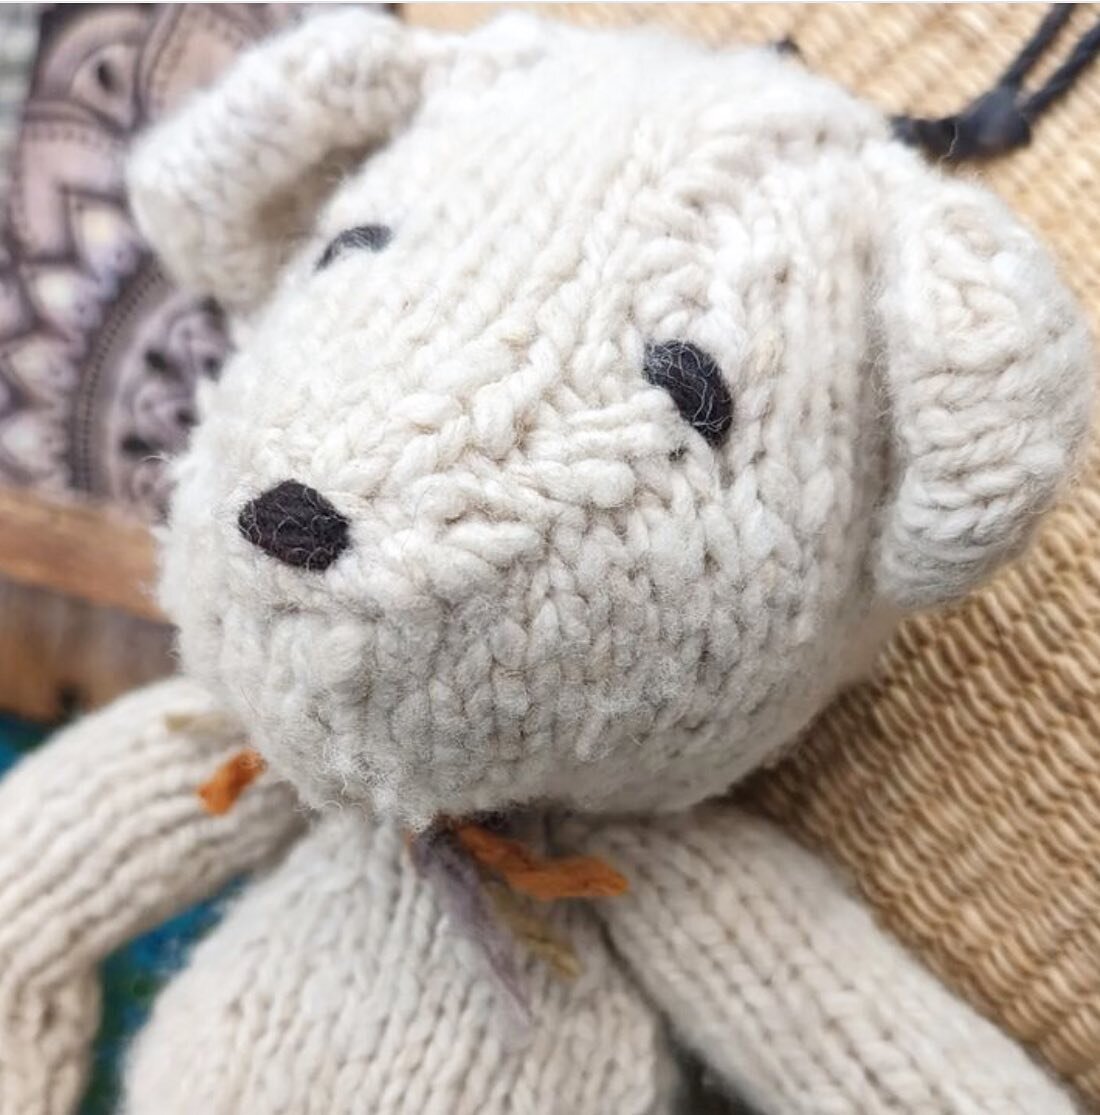 Captured by one of wonderful stockists @aware.sdproject 
Nothing quite like Ditsy bear love ✨
#ethical #socialimpact #handmade #changinglivesstitchbystitch #smallbusinessaustralia